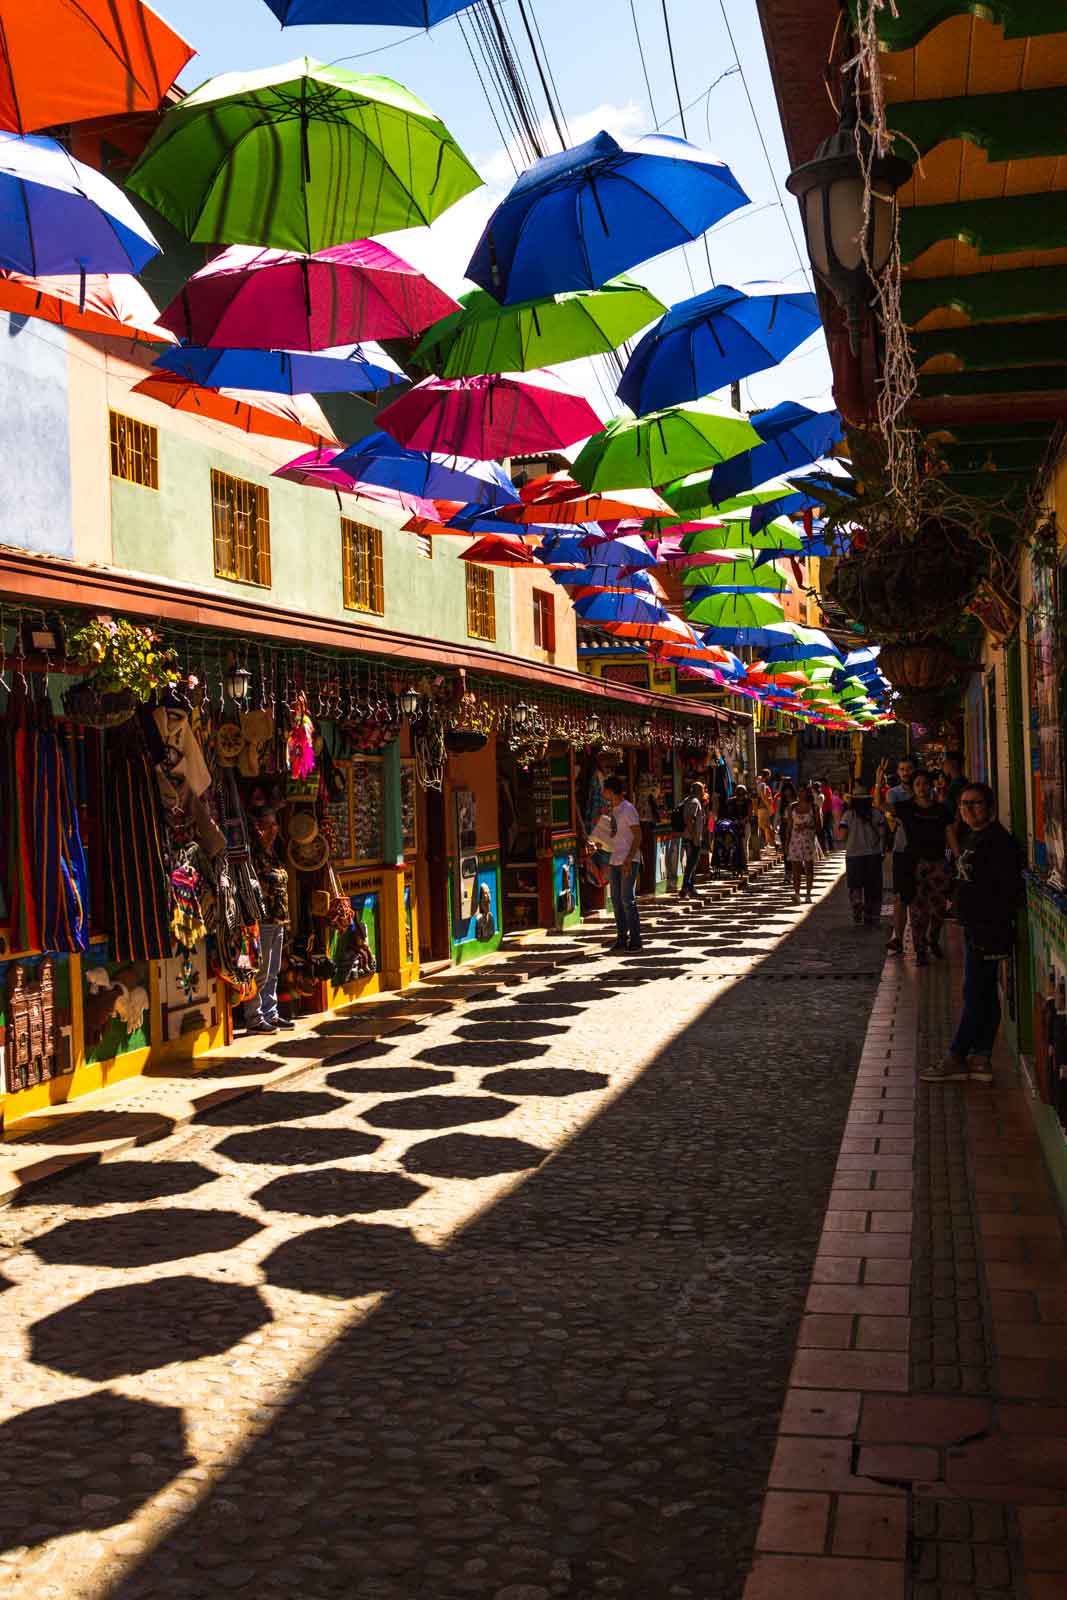 We stopped at Guatape Street on our Medellin tour.